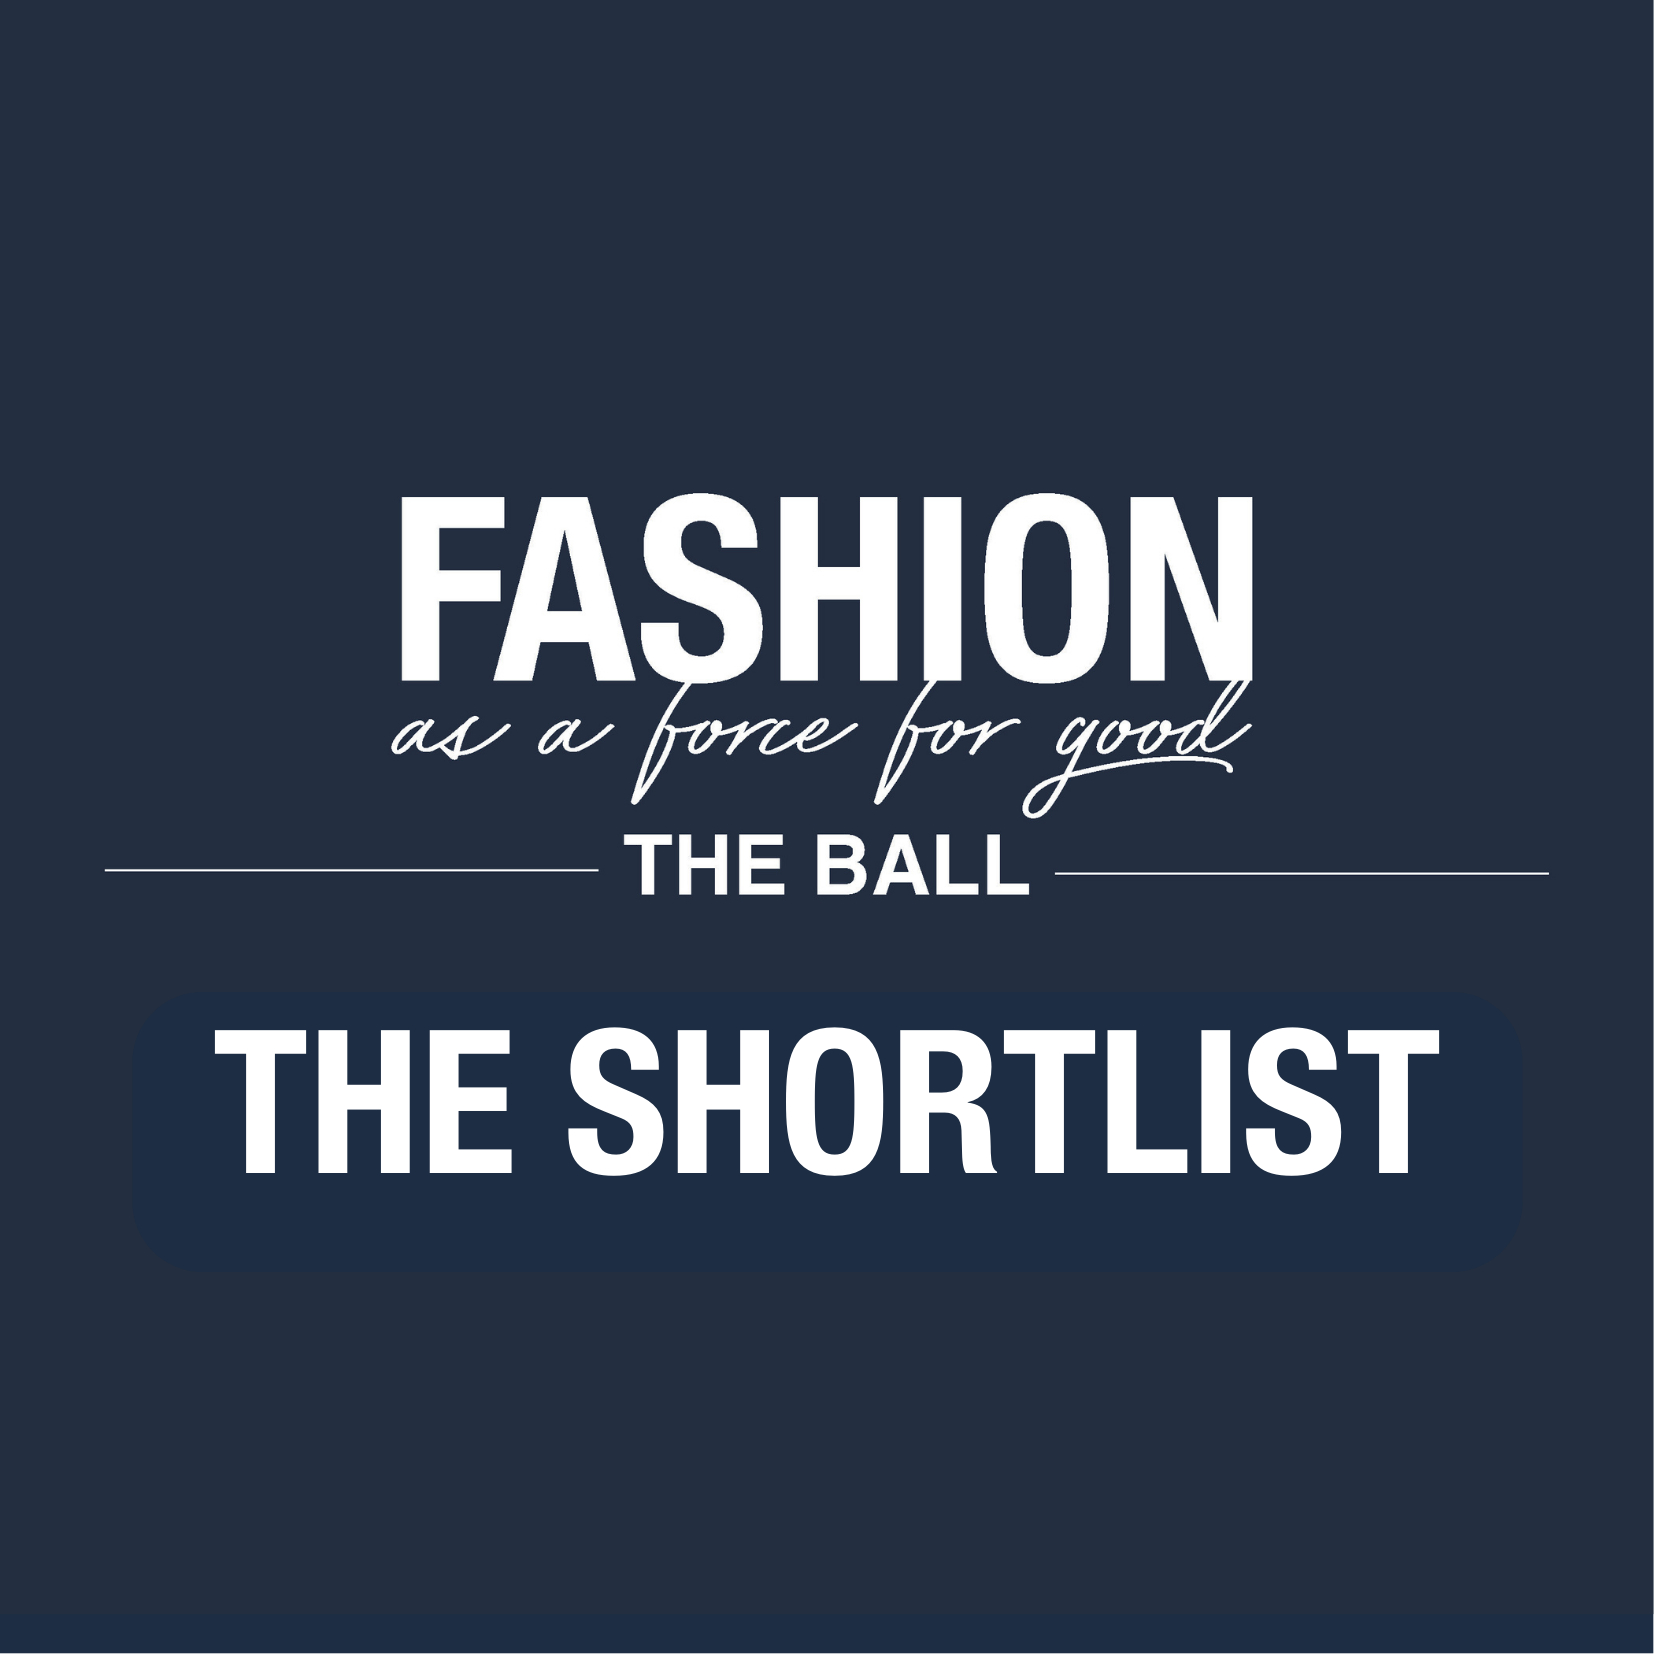 Fashion as a Force for Good – The Shortlist image